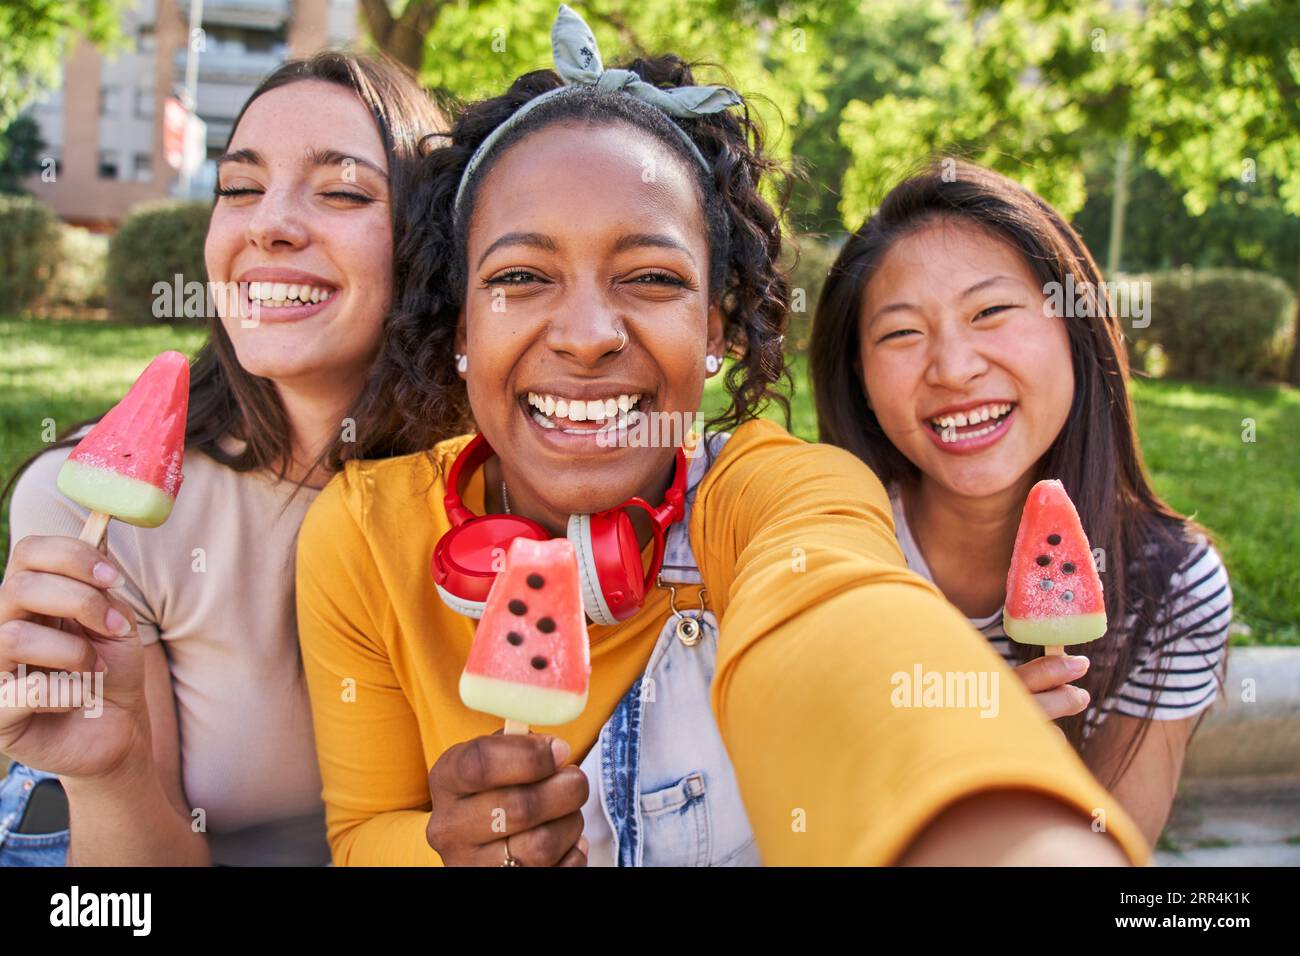 Close up faces three smiling young multi-ethnic women outdoors eating ice cream. Concept friendship. Stock Photo